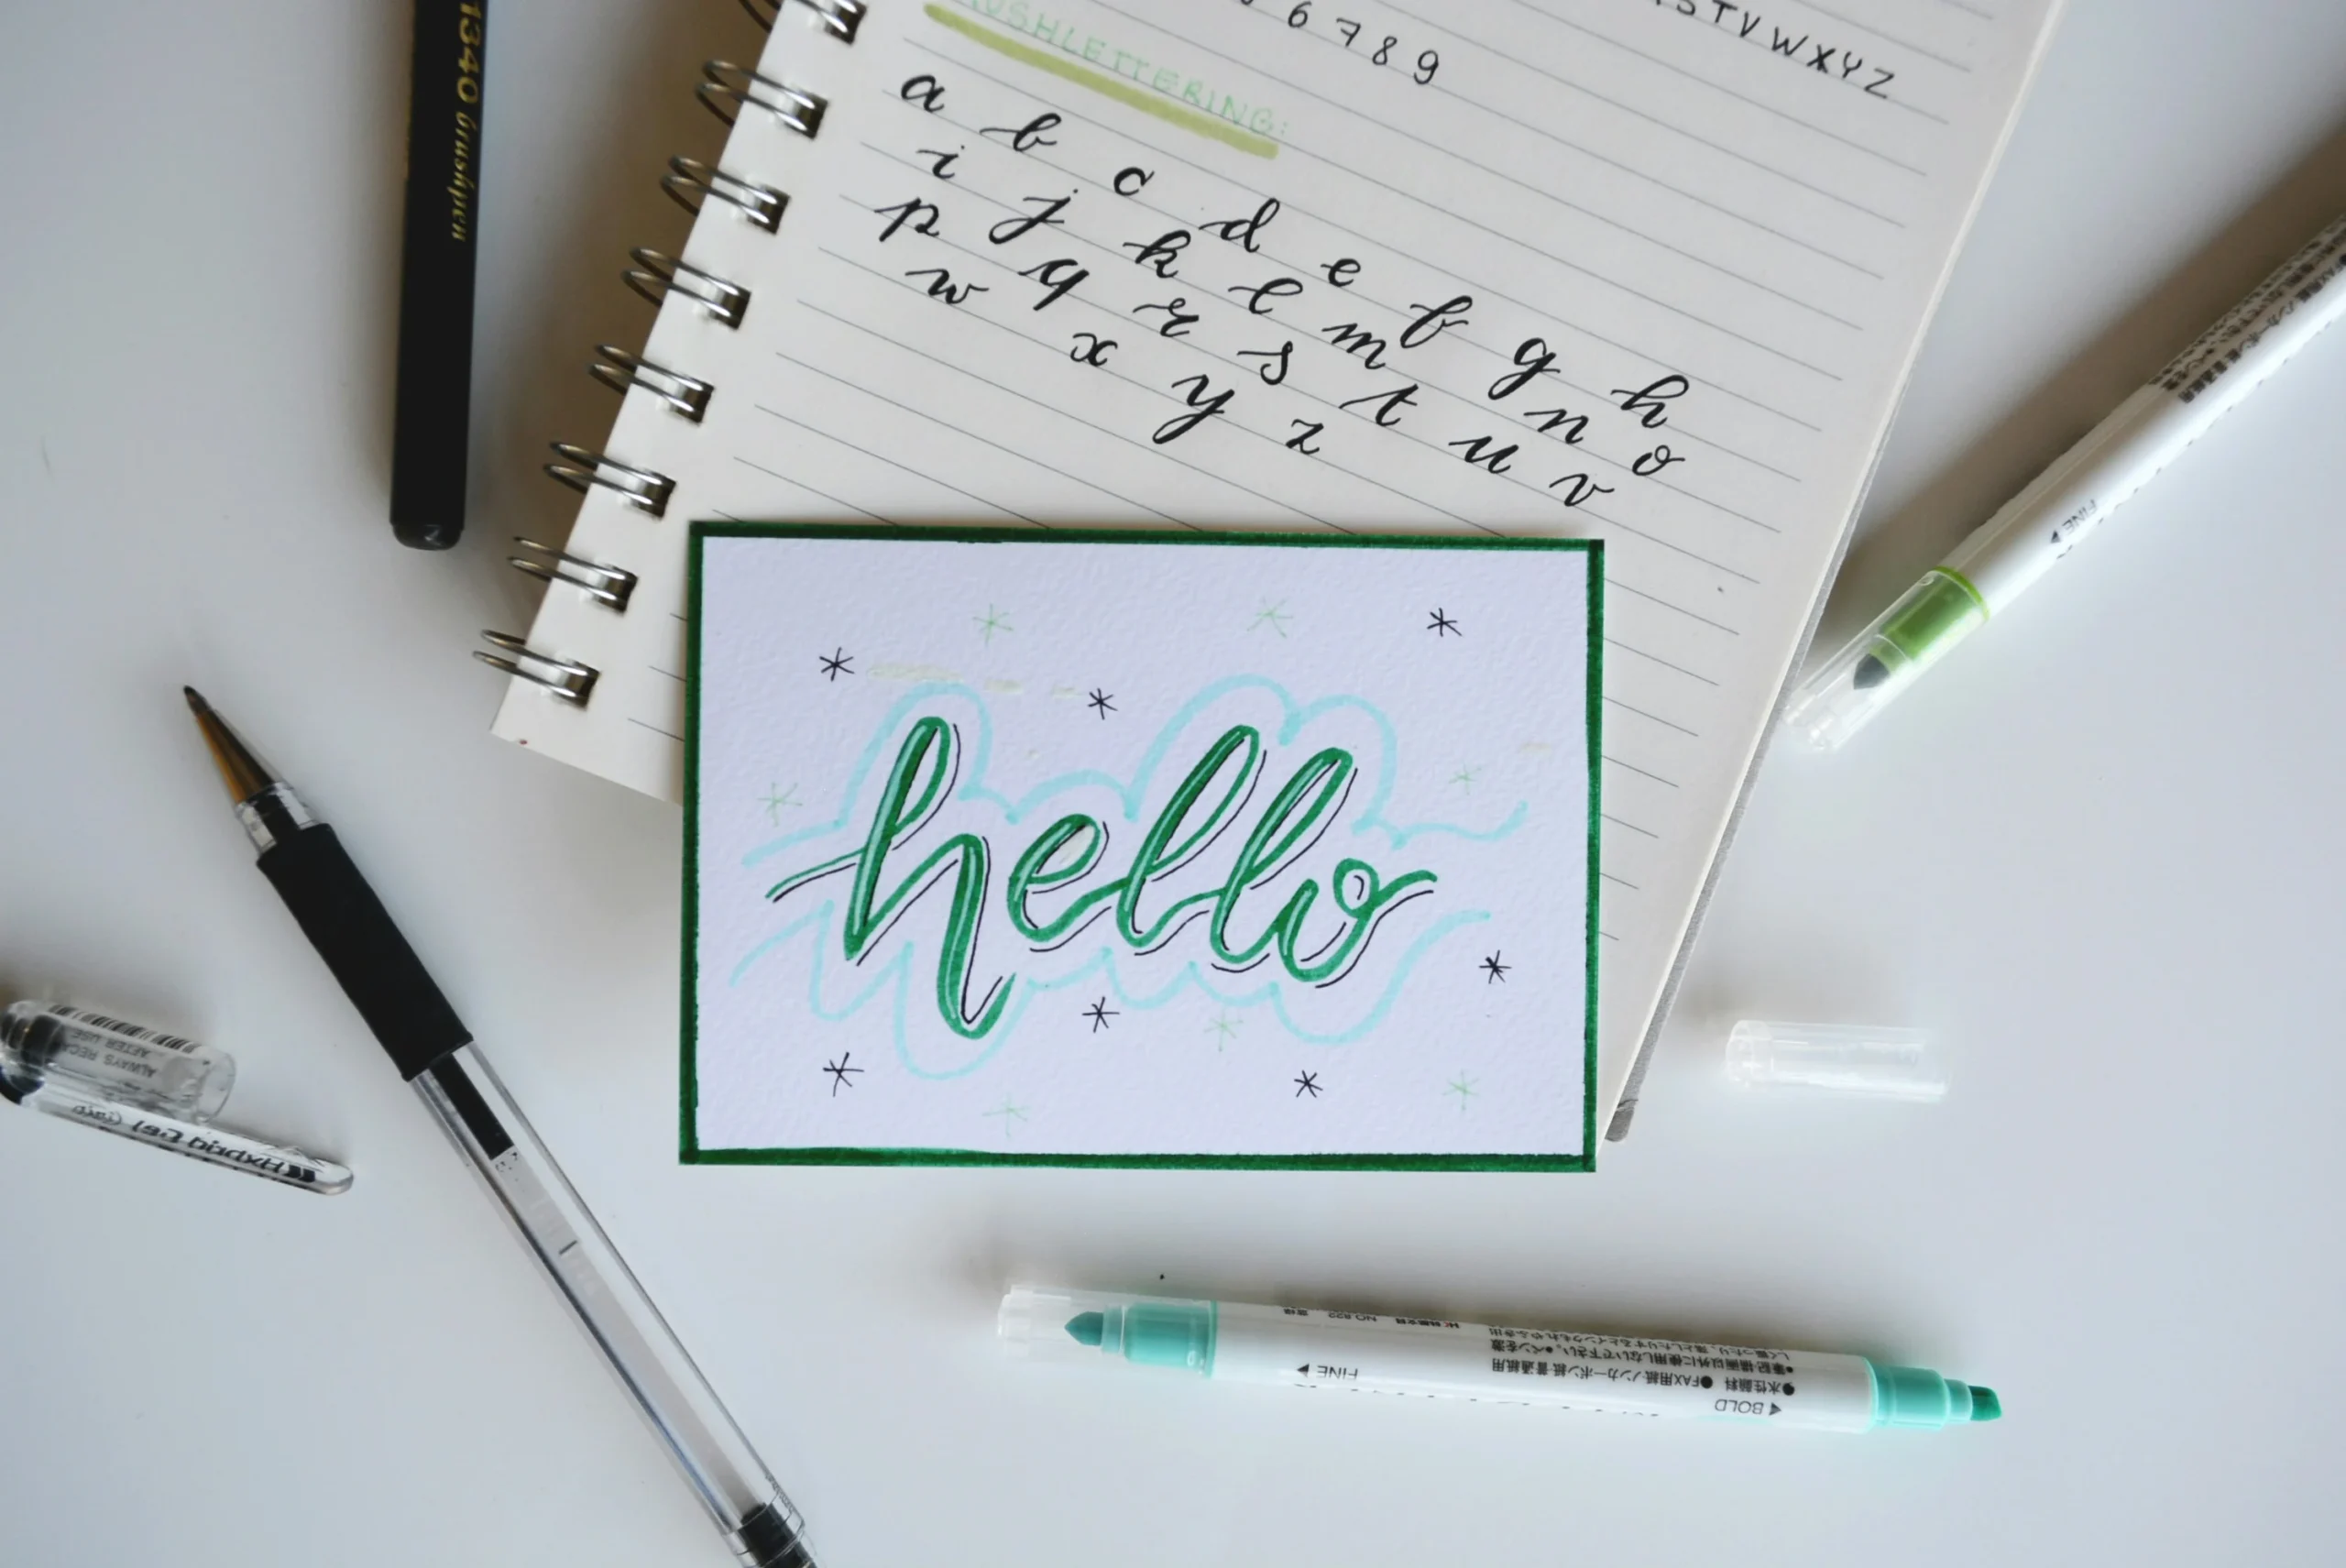 The word "hello" written in cursive on an ipad showing easy to read fonts.